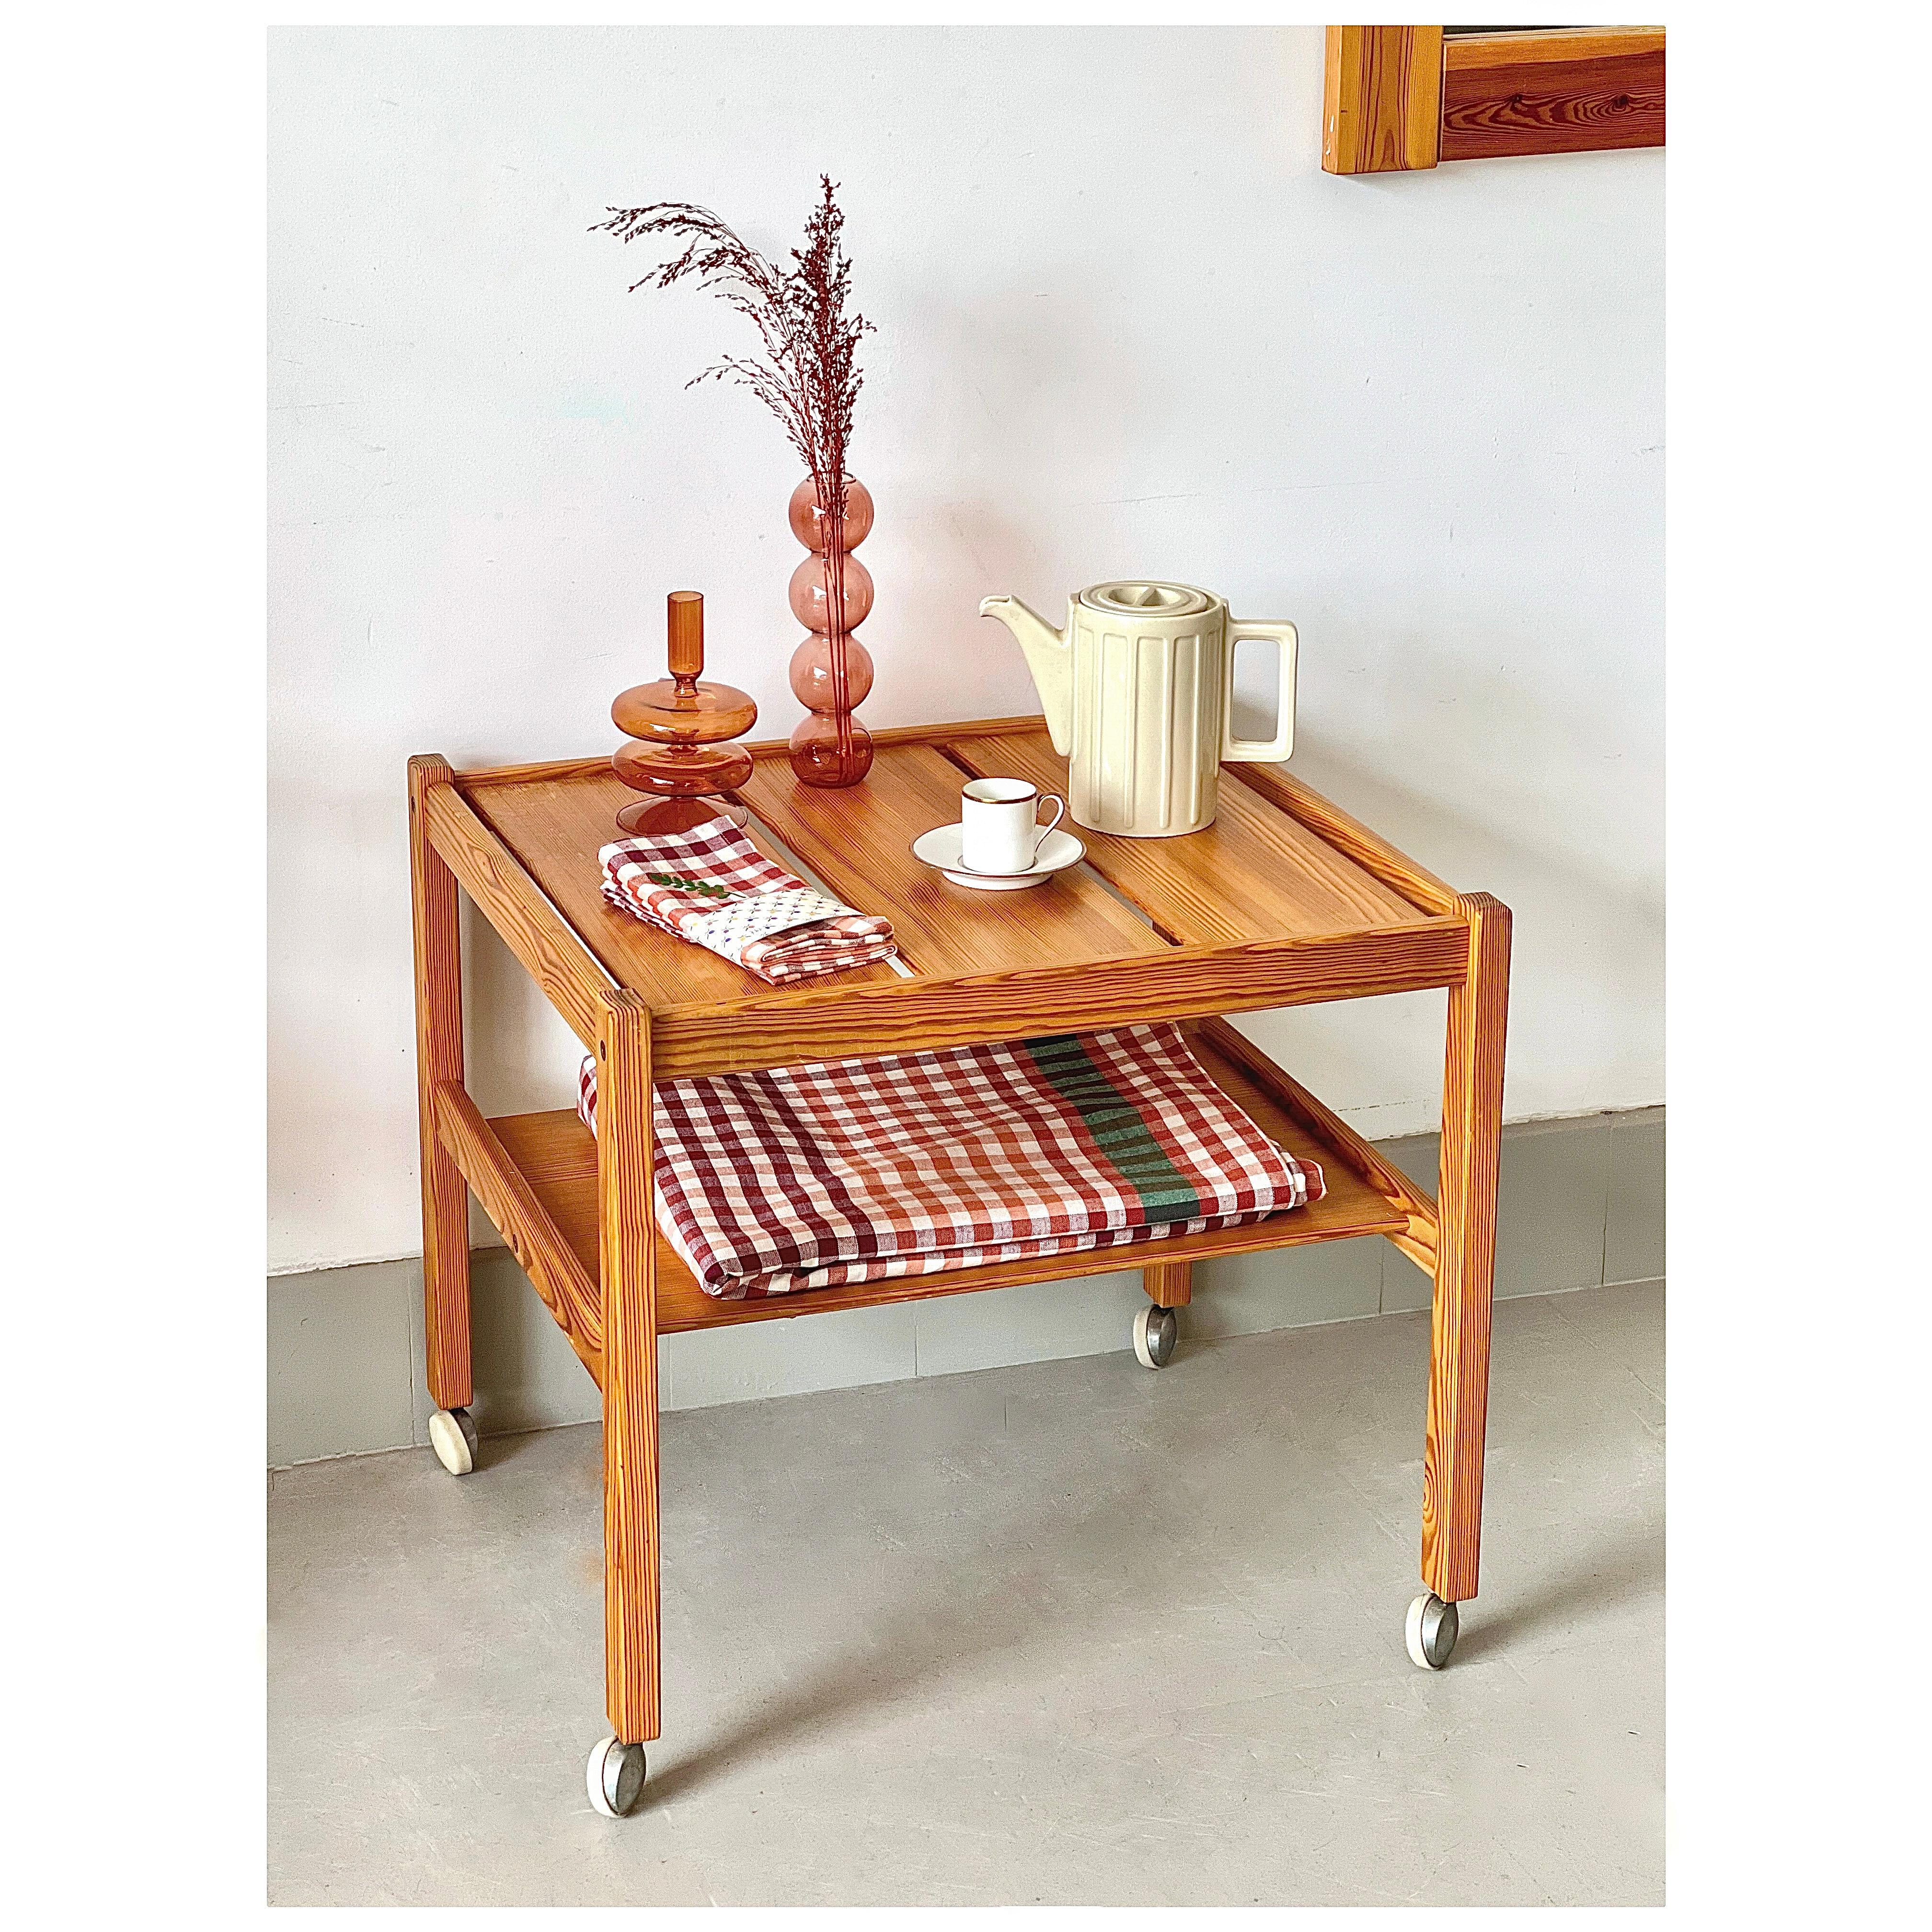 A beautiful mid century trolley / bar cart 🍸 / side table on wheels, made from solid pine wood: that’s the Furubo trolley by Ingve Ekstrom for Swedese, Sweden, 1964
Dress it in the kitchen with all kinds of goodies and roll it out to your guests in